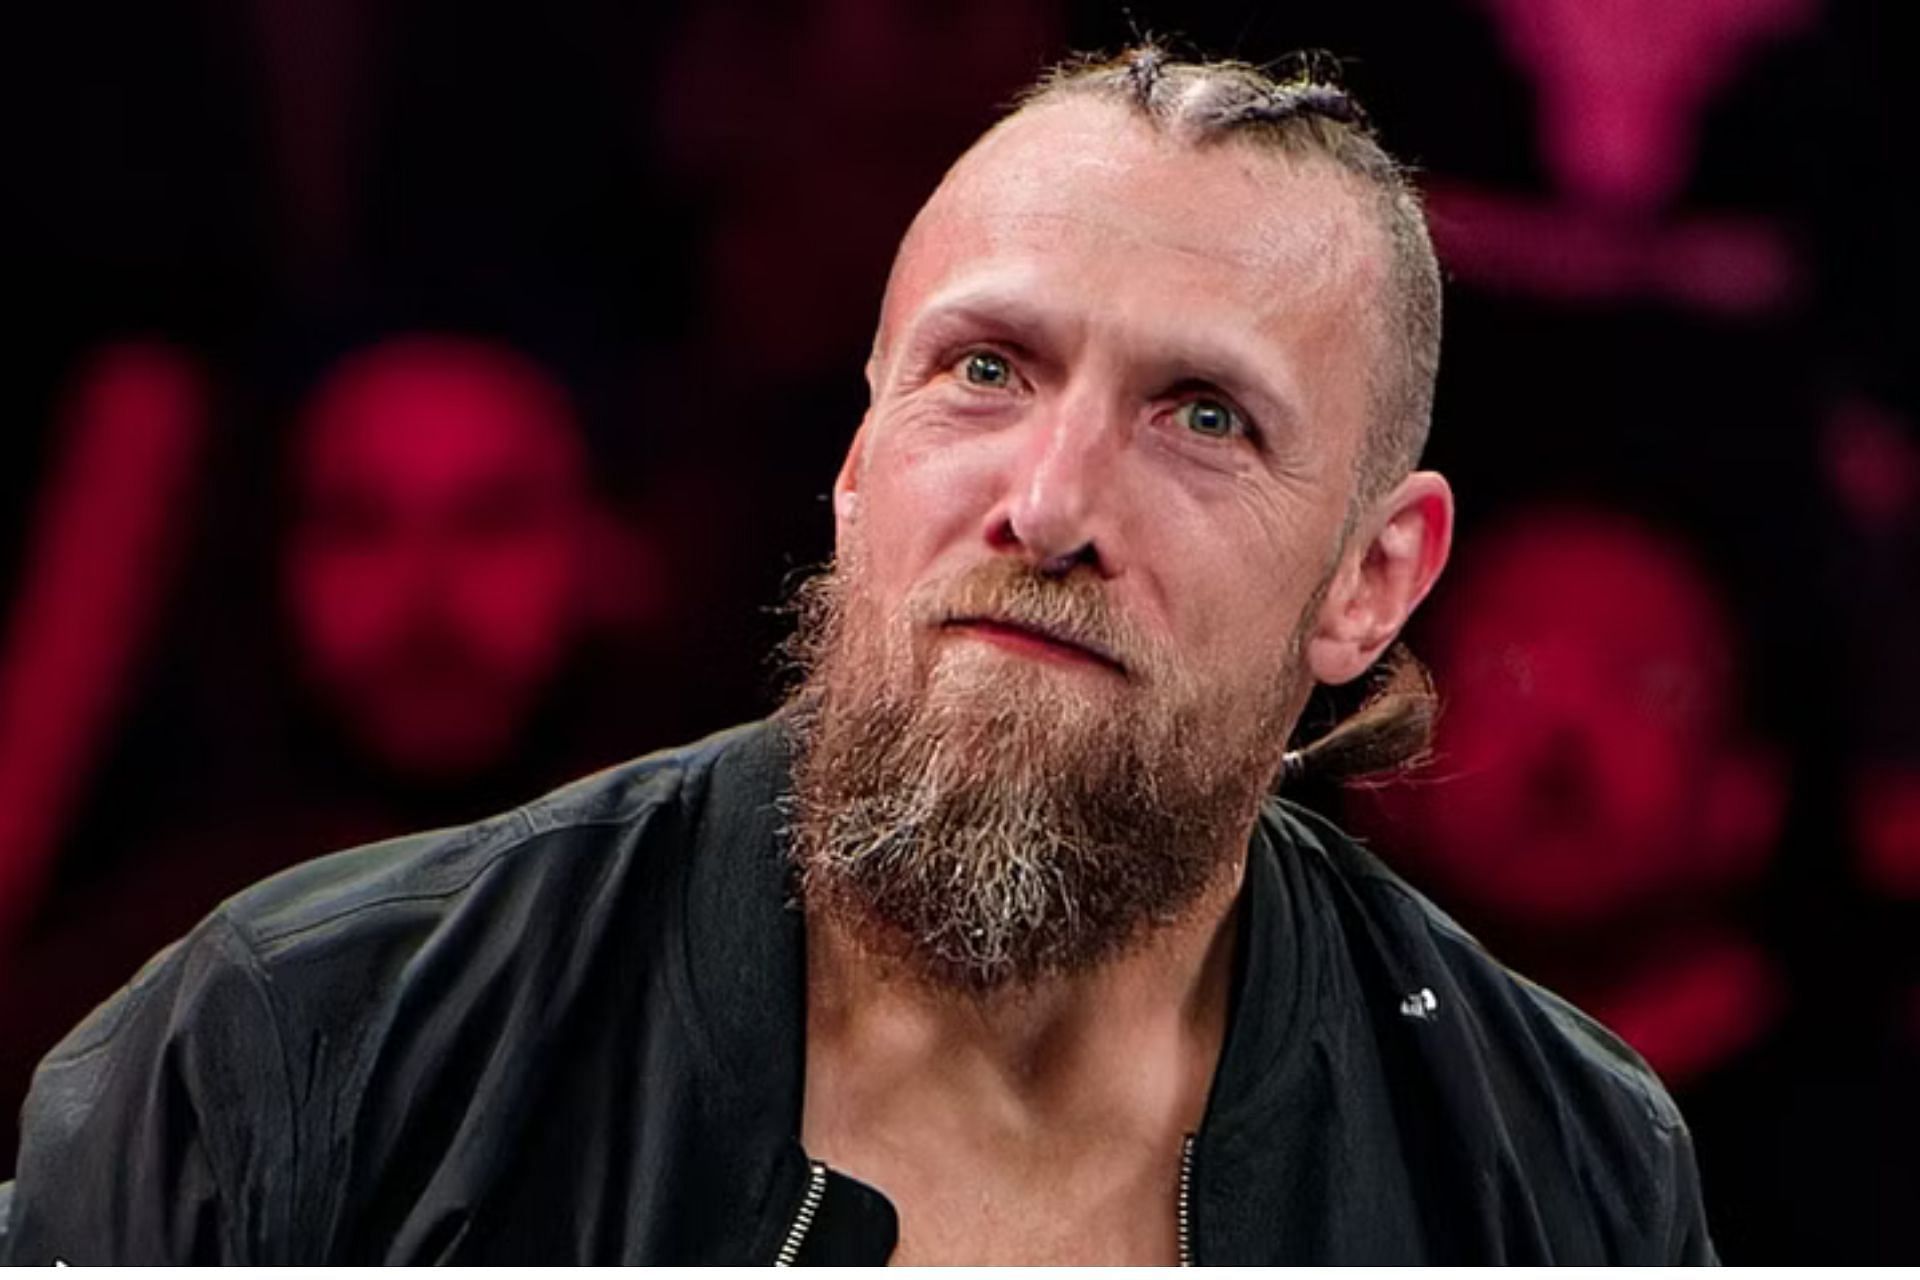 Bryan Danielson spoke about why he took on the role in the AEW disciplinary committee as well